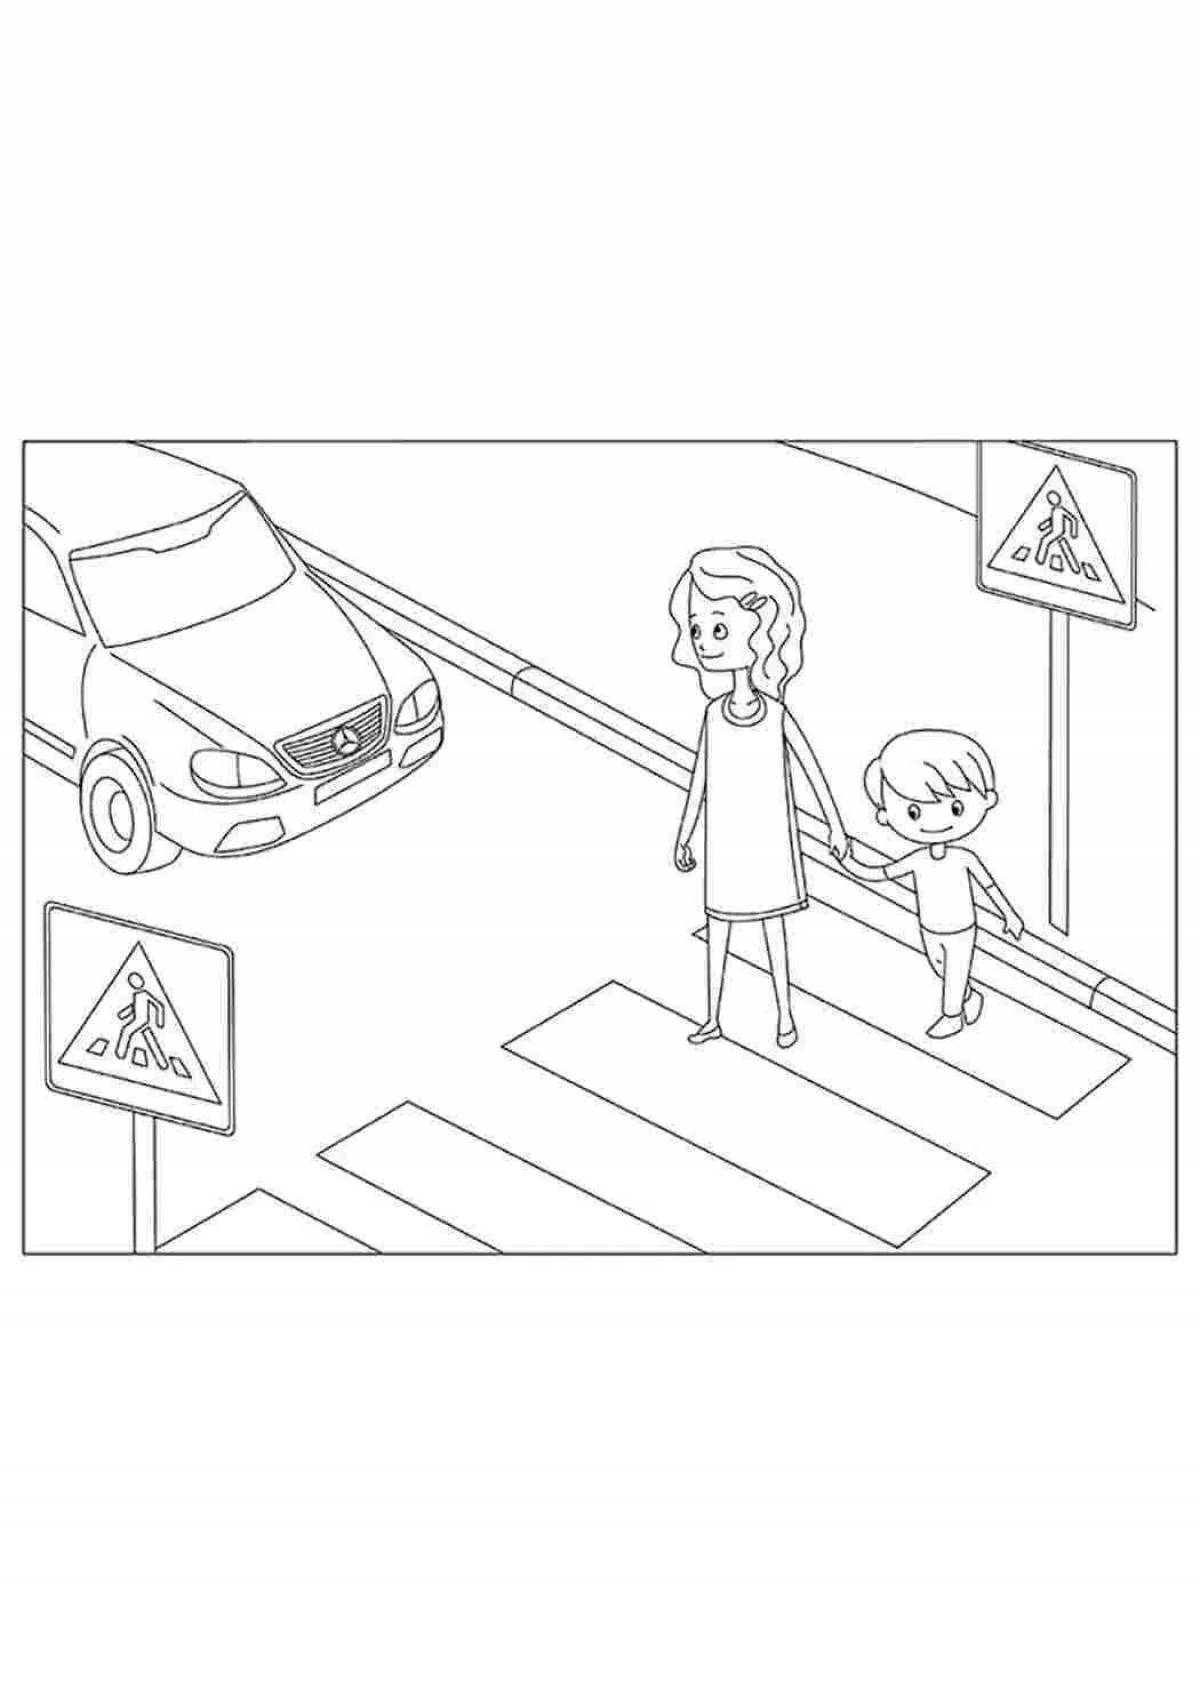 Stimulating traffic rules coloring pages for kids